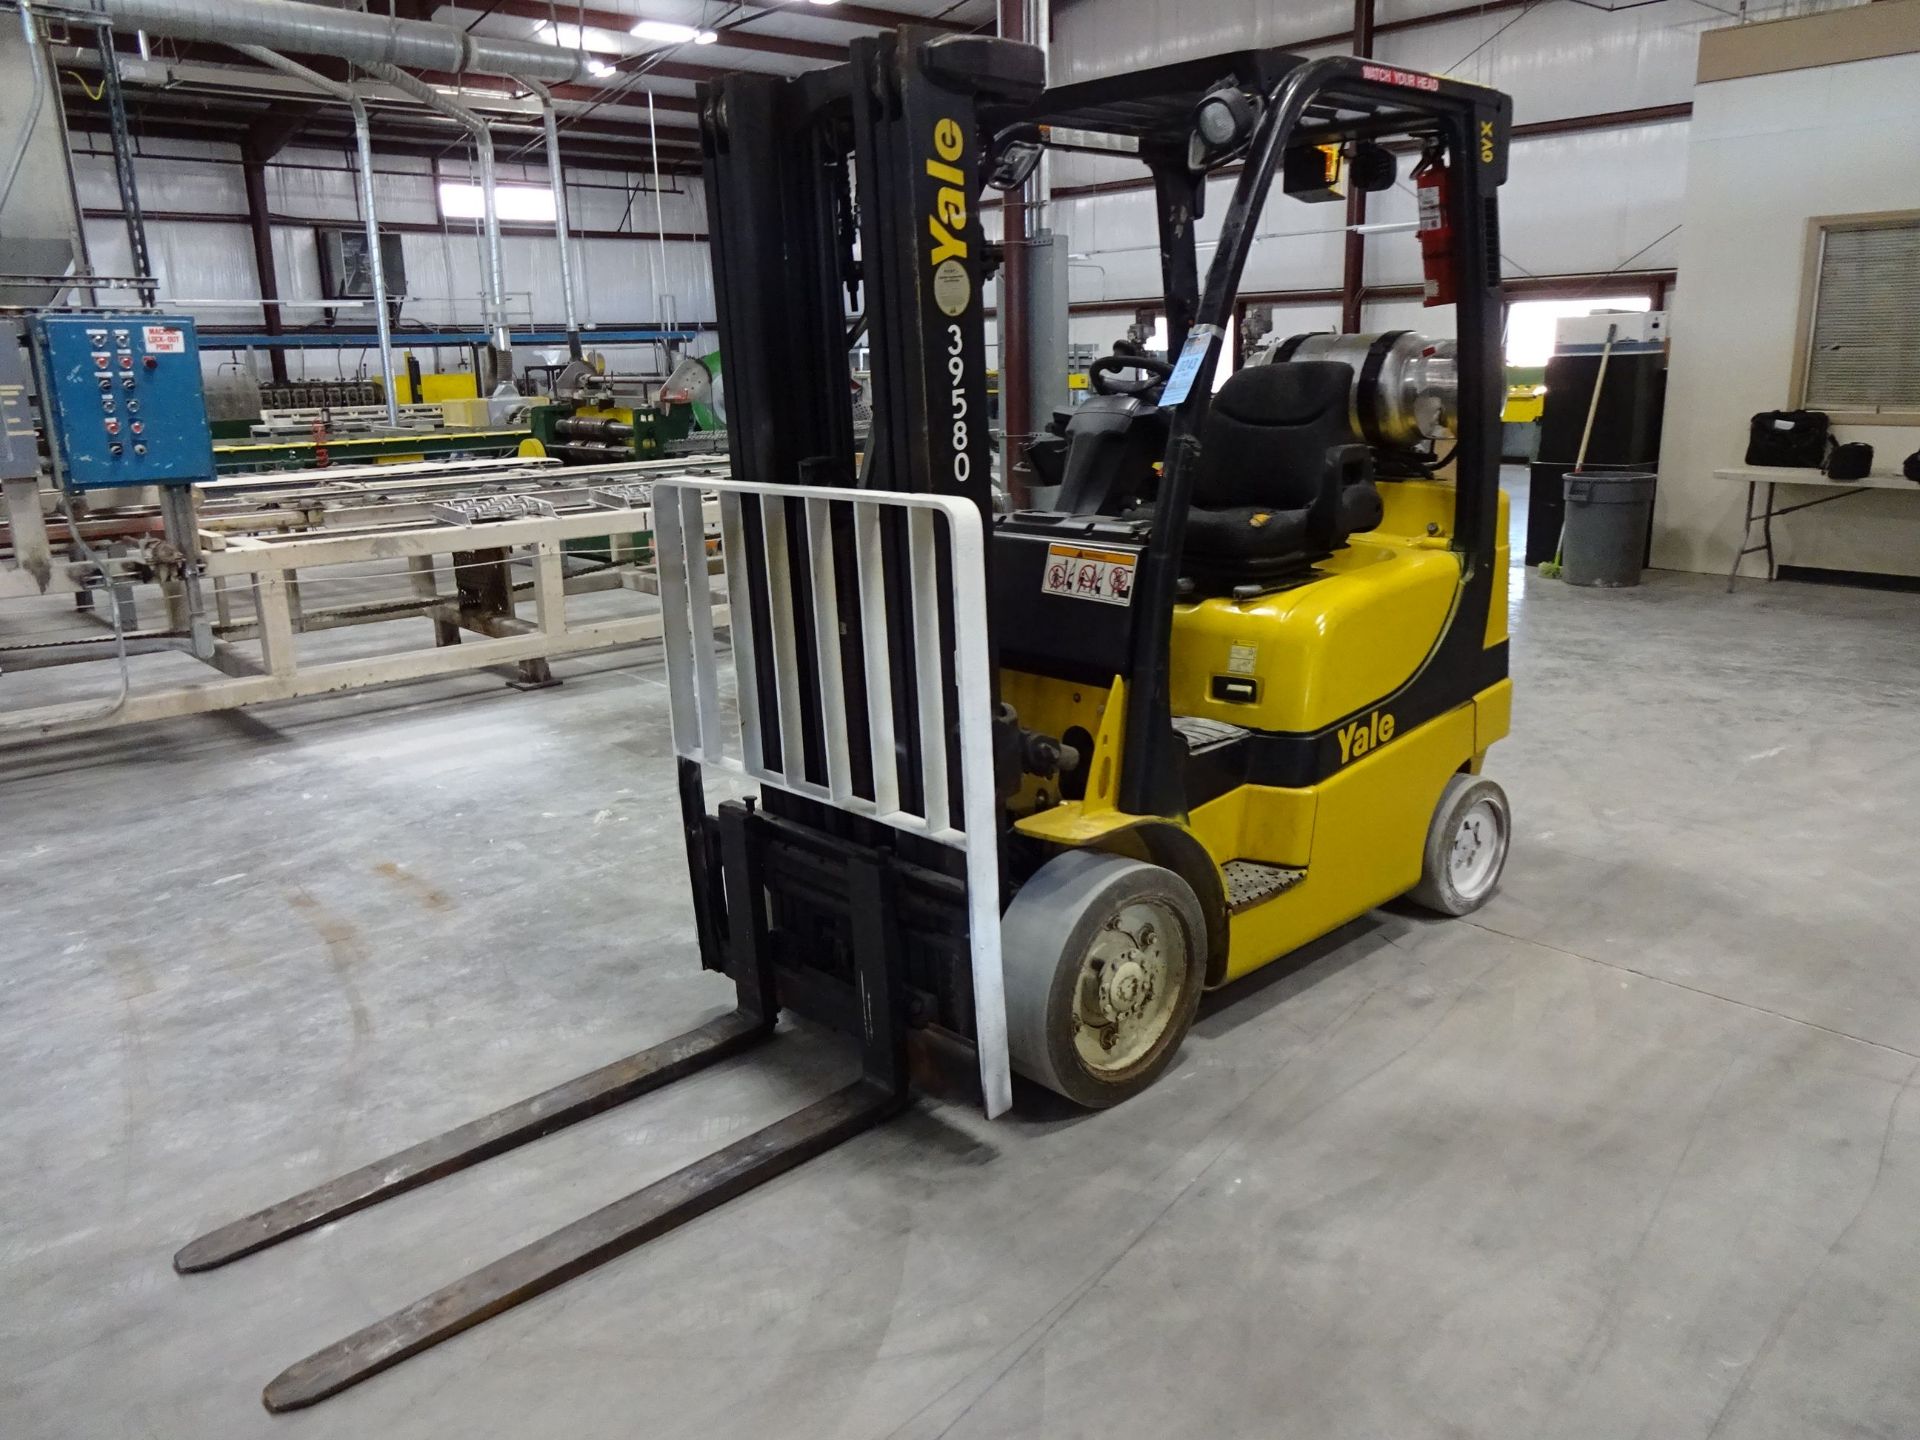 5,000 LB. YALE MODEL GLC050 SOLID TIRE LP GAS LIFT TRUCK; S/N A910V13076F, 14,864 HOURS SHOWING (NEW